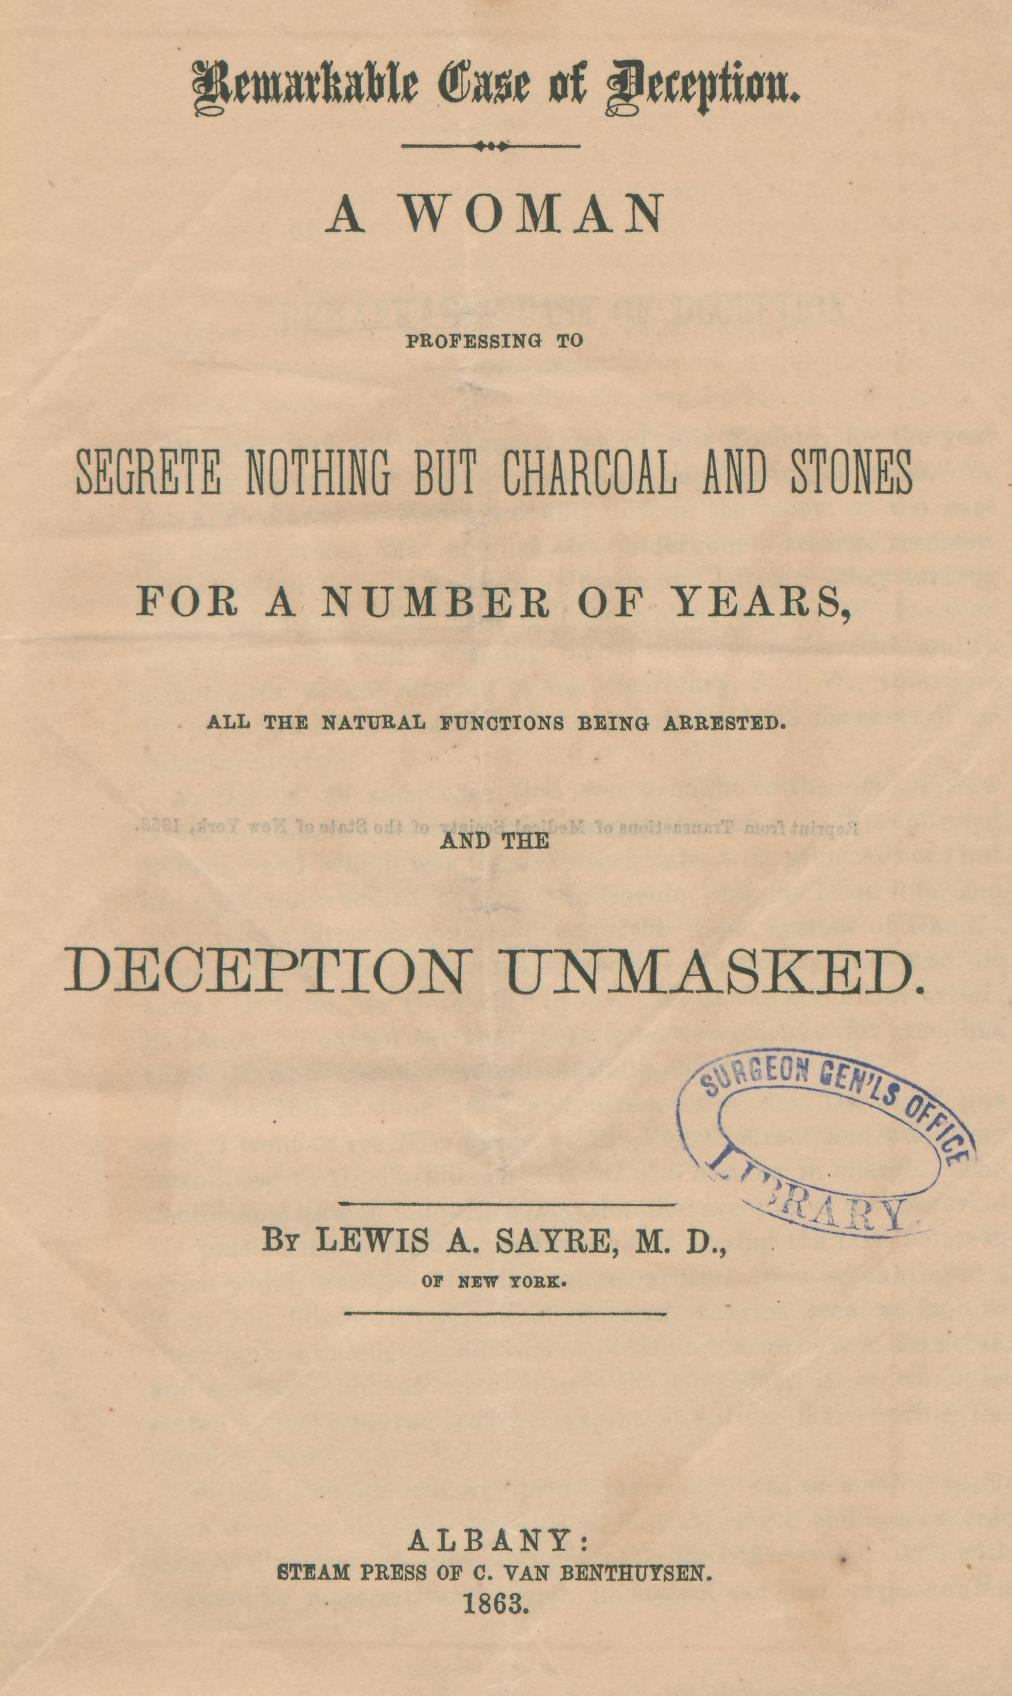 Title page for Lewis Sayre's pamphlet: Remarkable Case of Deception. A woman professing to secrete nothing but charcoal and stones for a number of years, all the natural functions being arrested, and the deception unmasked.